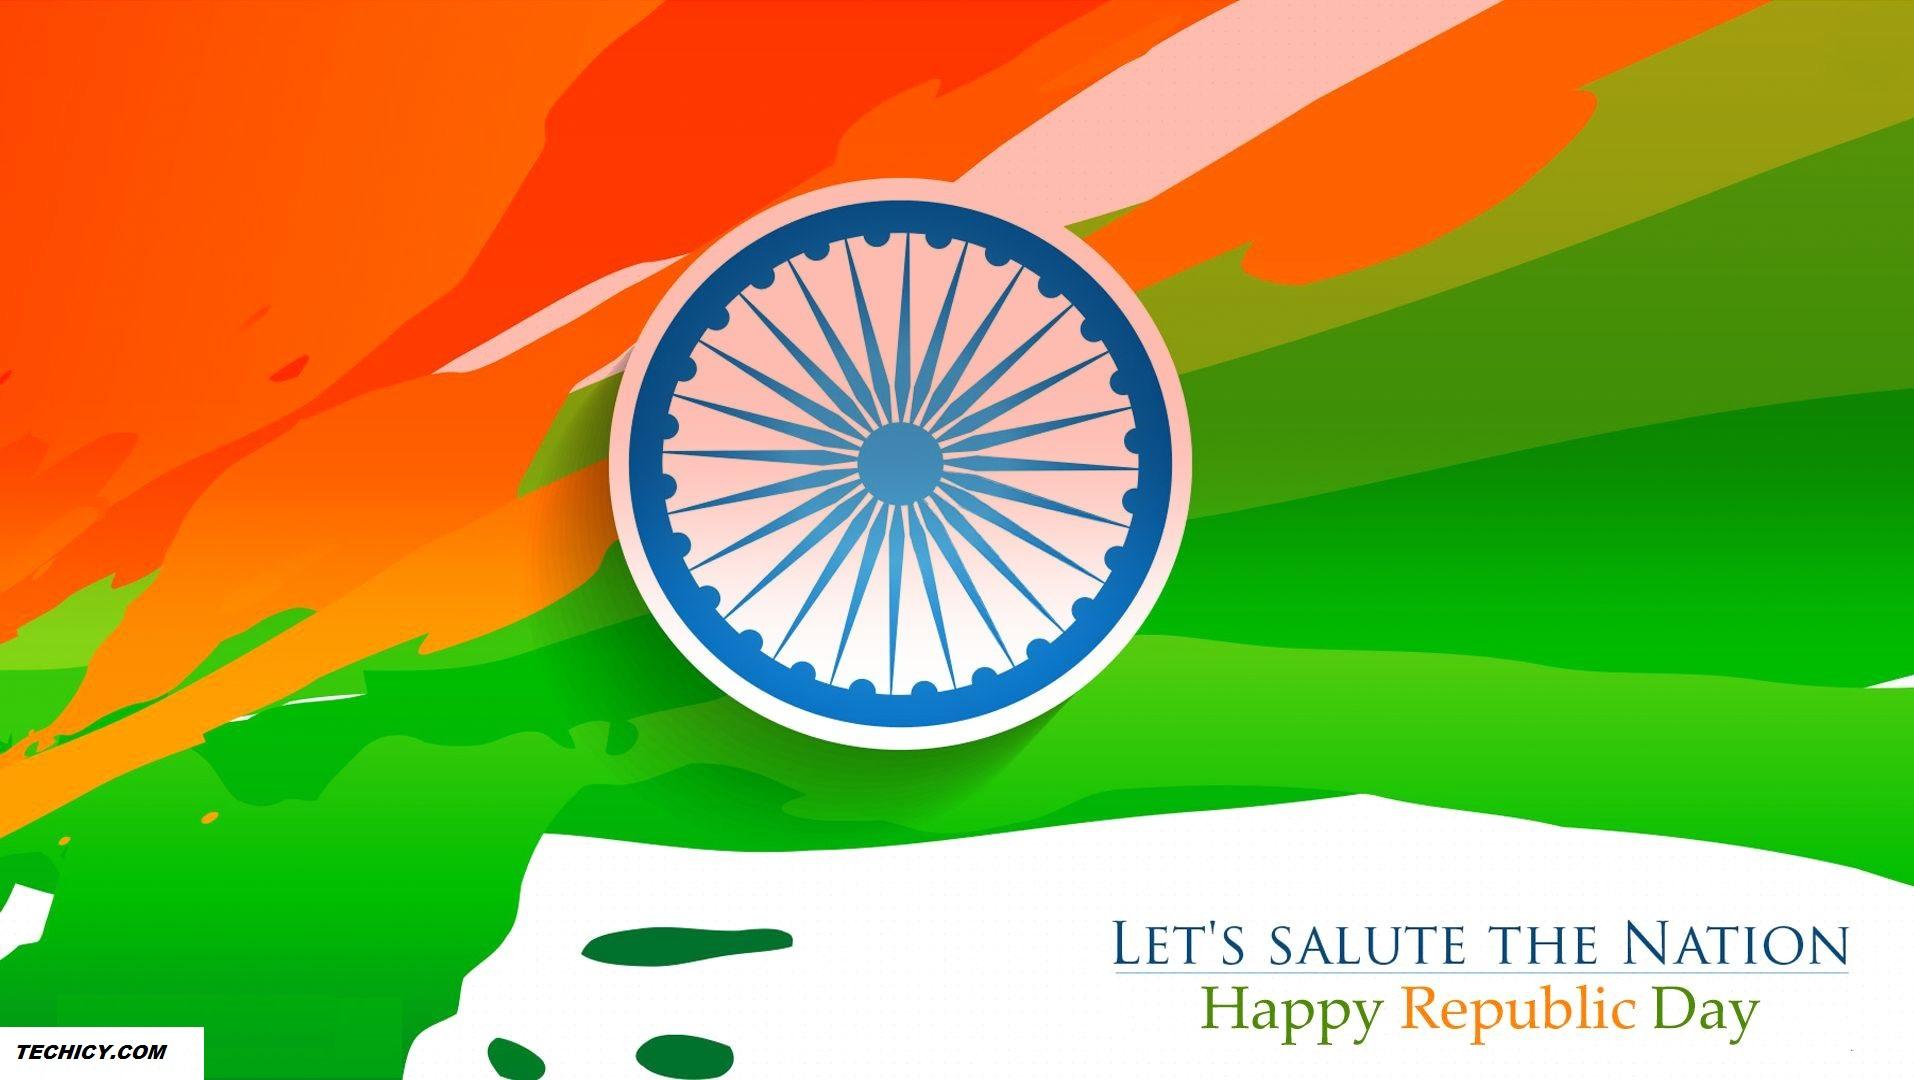 Best Republic Day HD Image and Wallpaper for You {Free